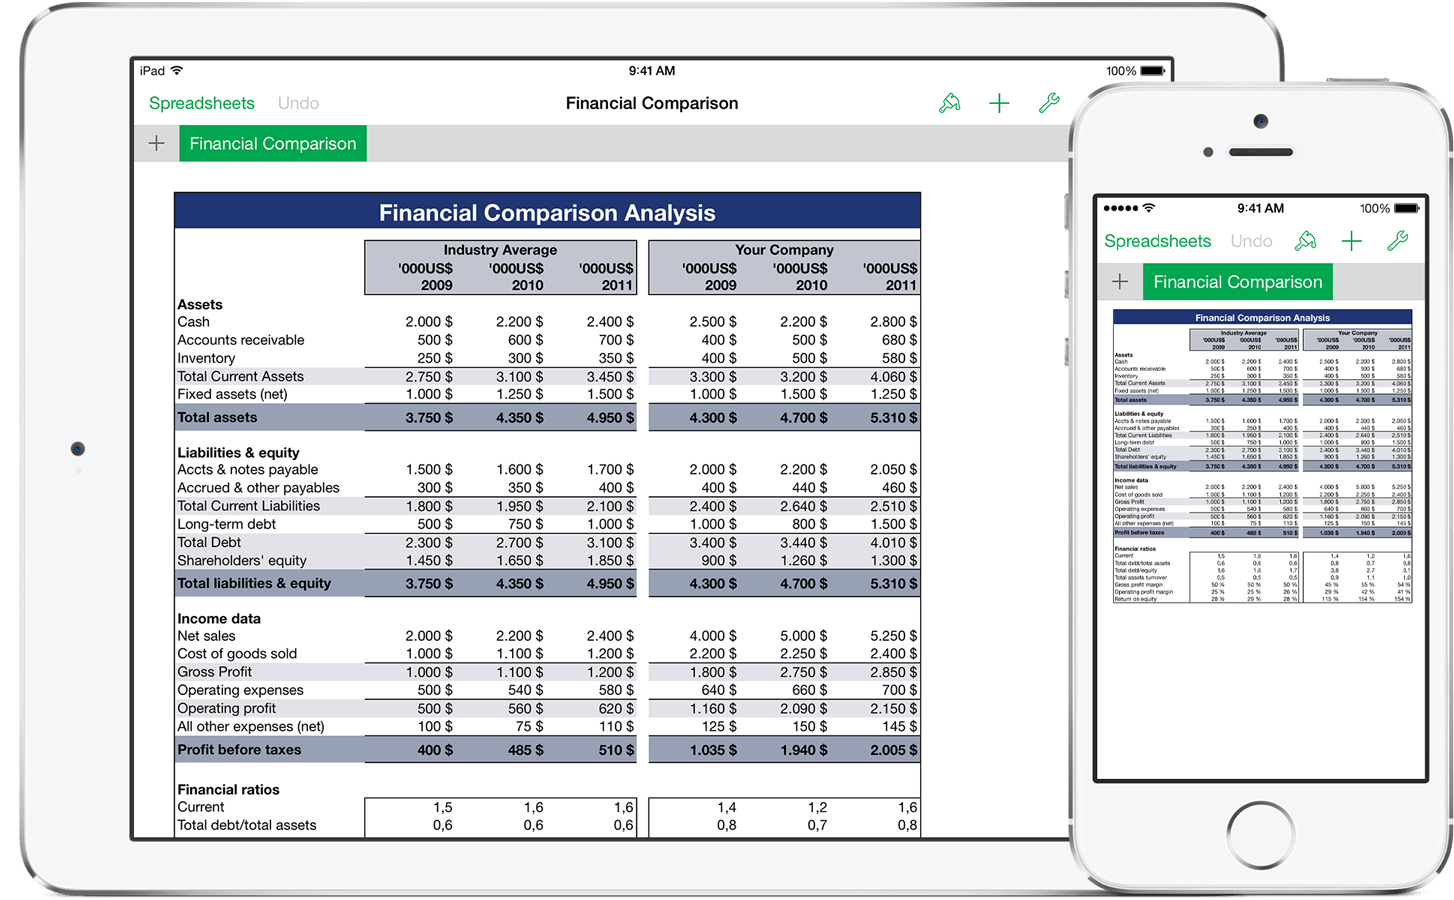 Budget Spreadsheet For Mac Pertaining To Budget Spreadsheet For Mac  Resourcesaver